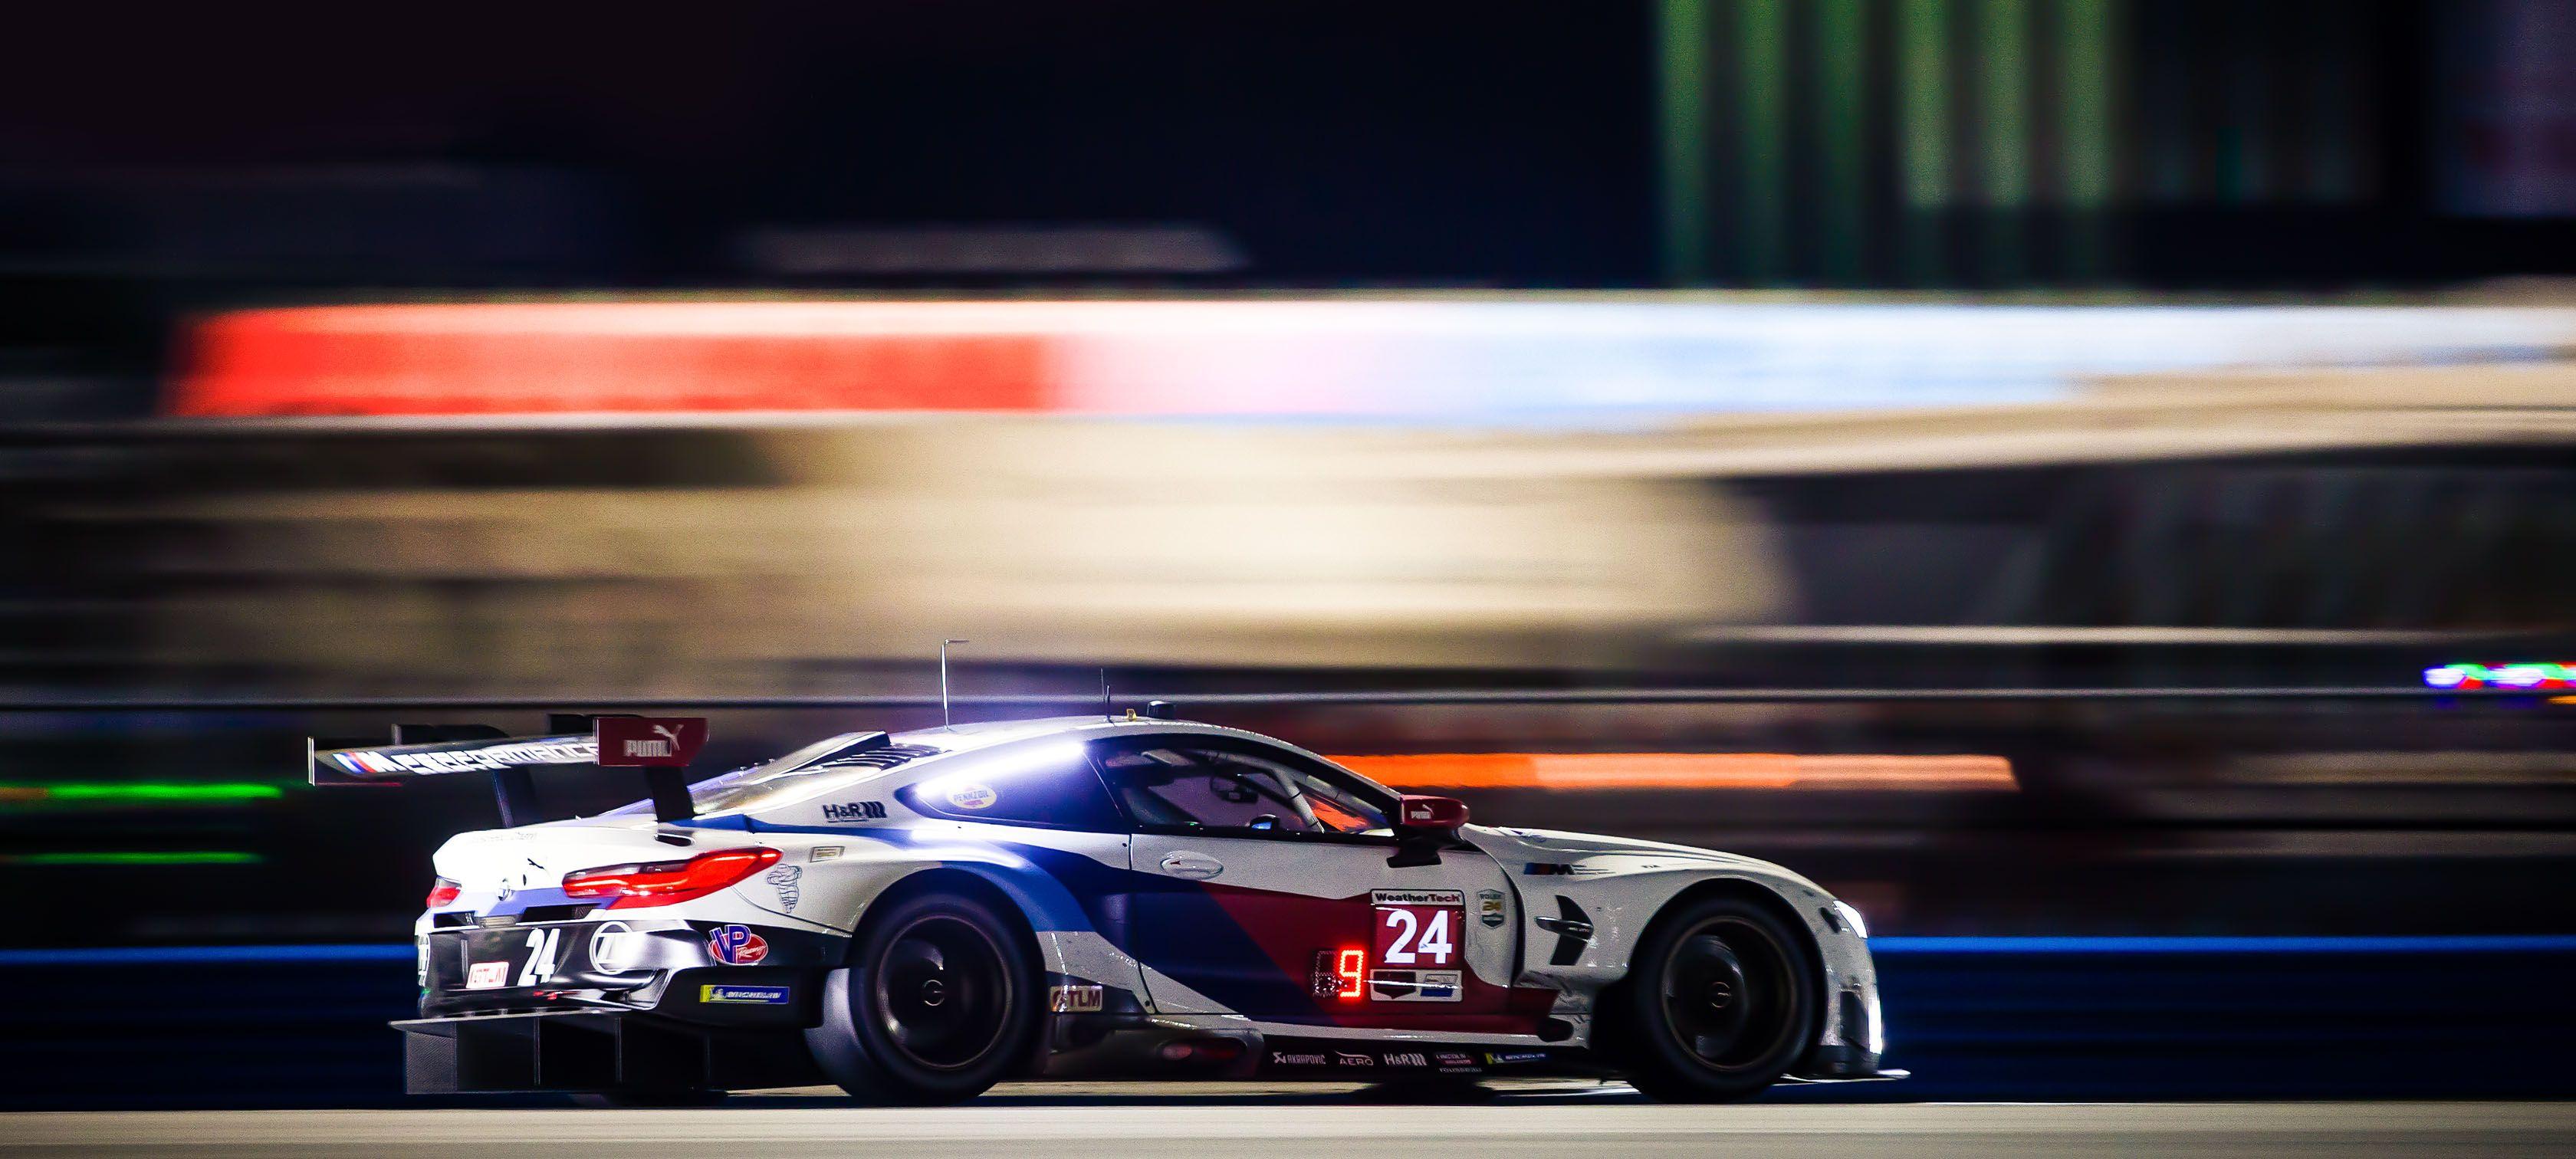 350 Race Car Pictures  Download Free Images on Unsplash